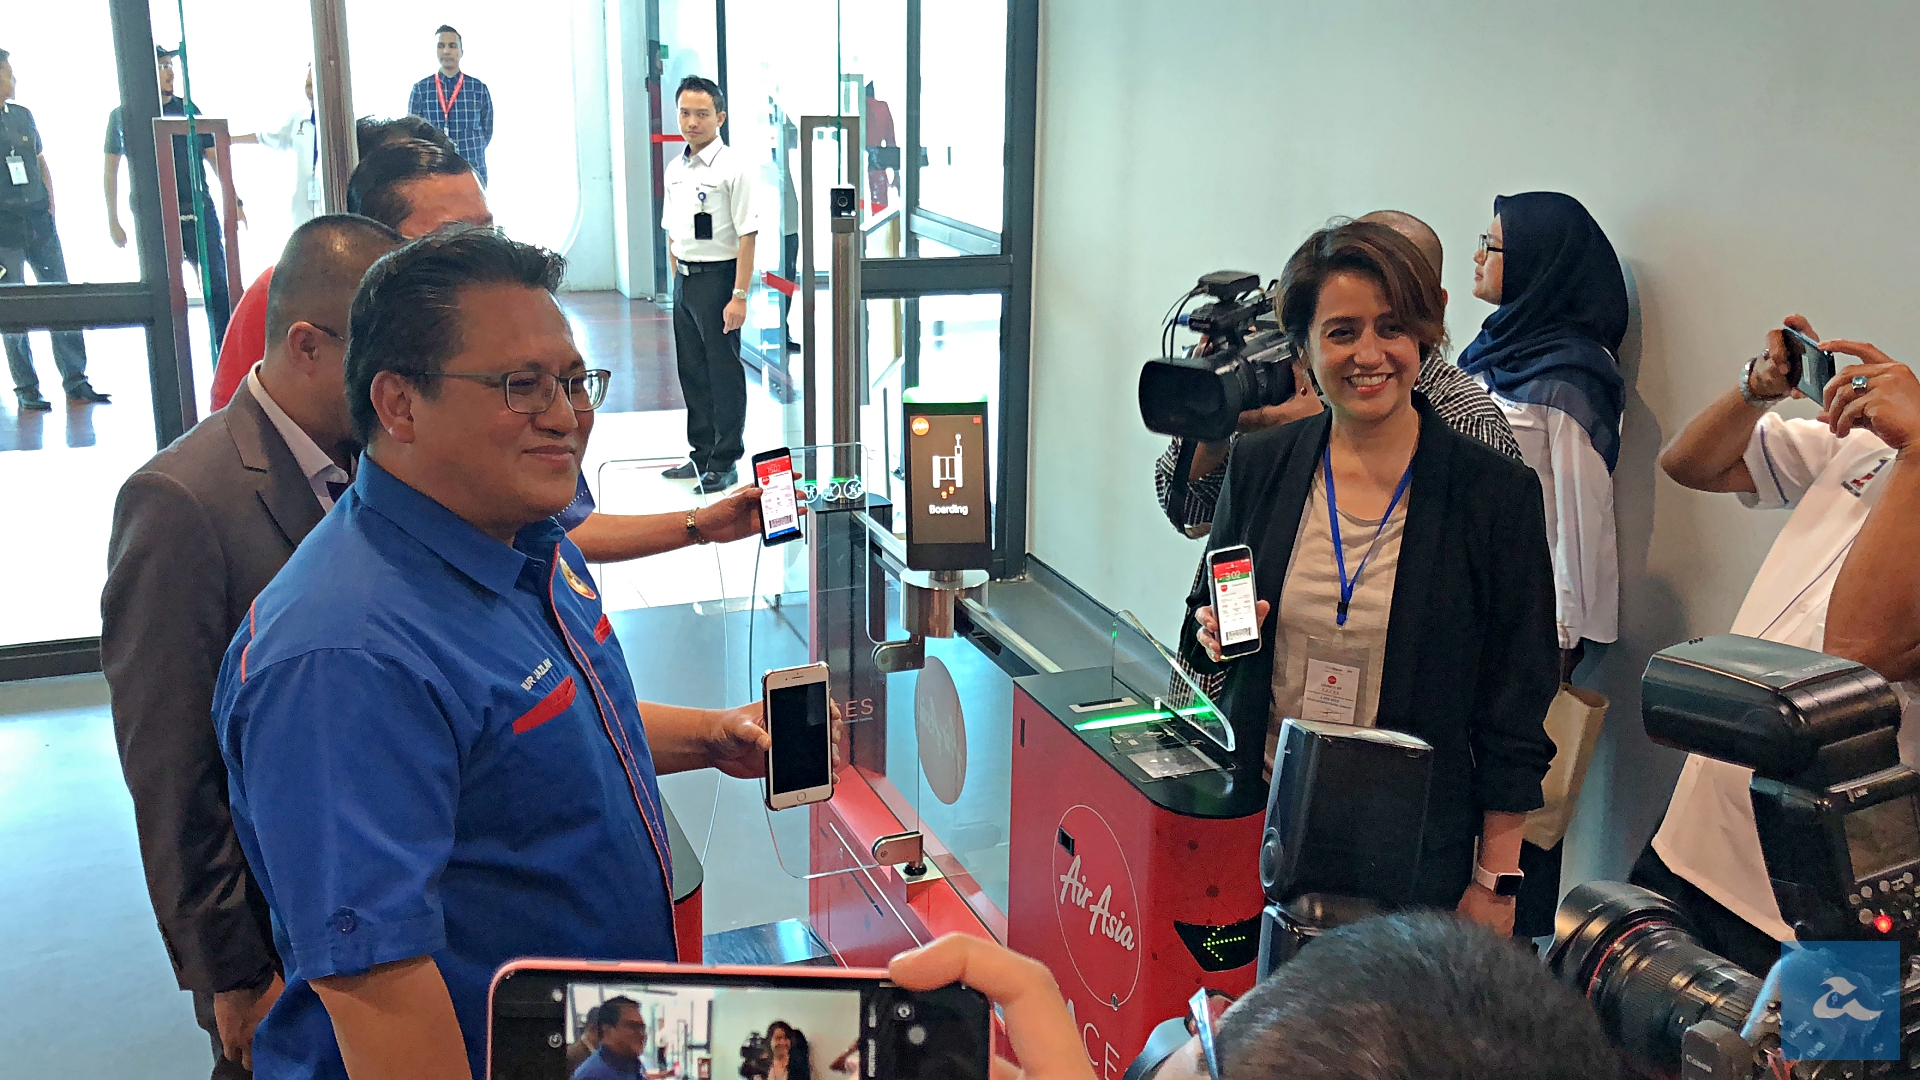 AirAsia FACES Recognition IMG 2468